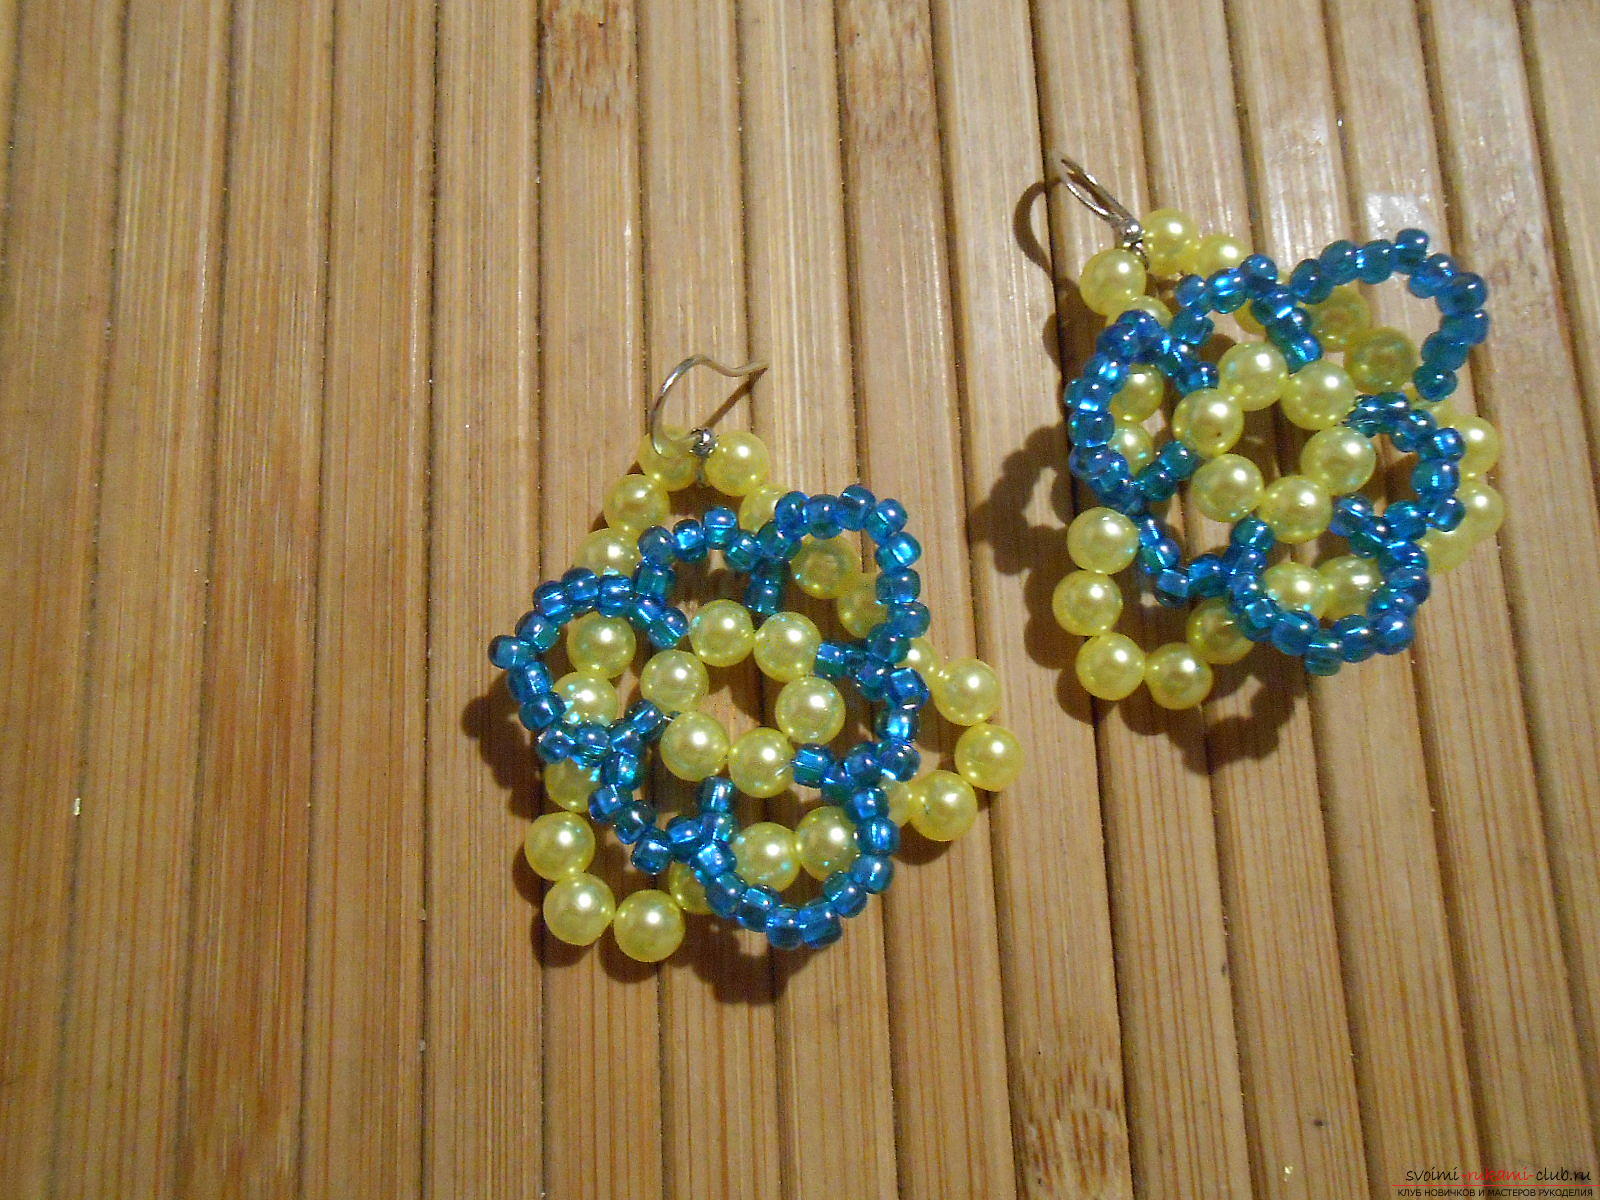 This master class of weaving from beads will tell you how to weave the earrings yourself. Photo # 1